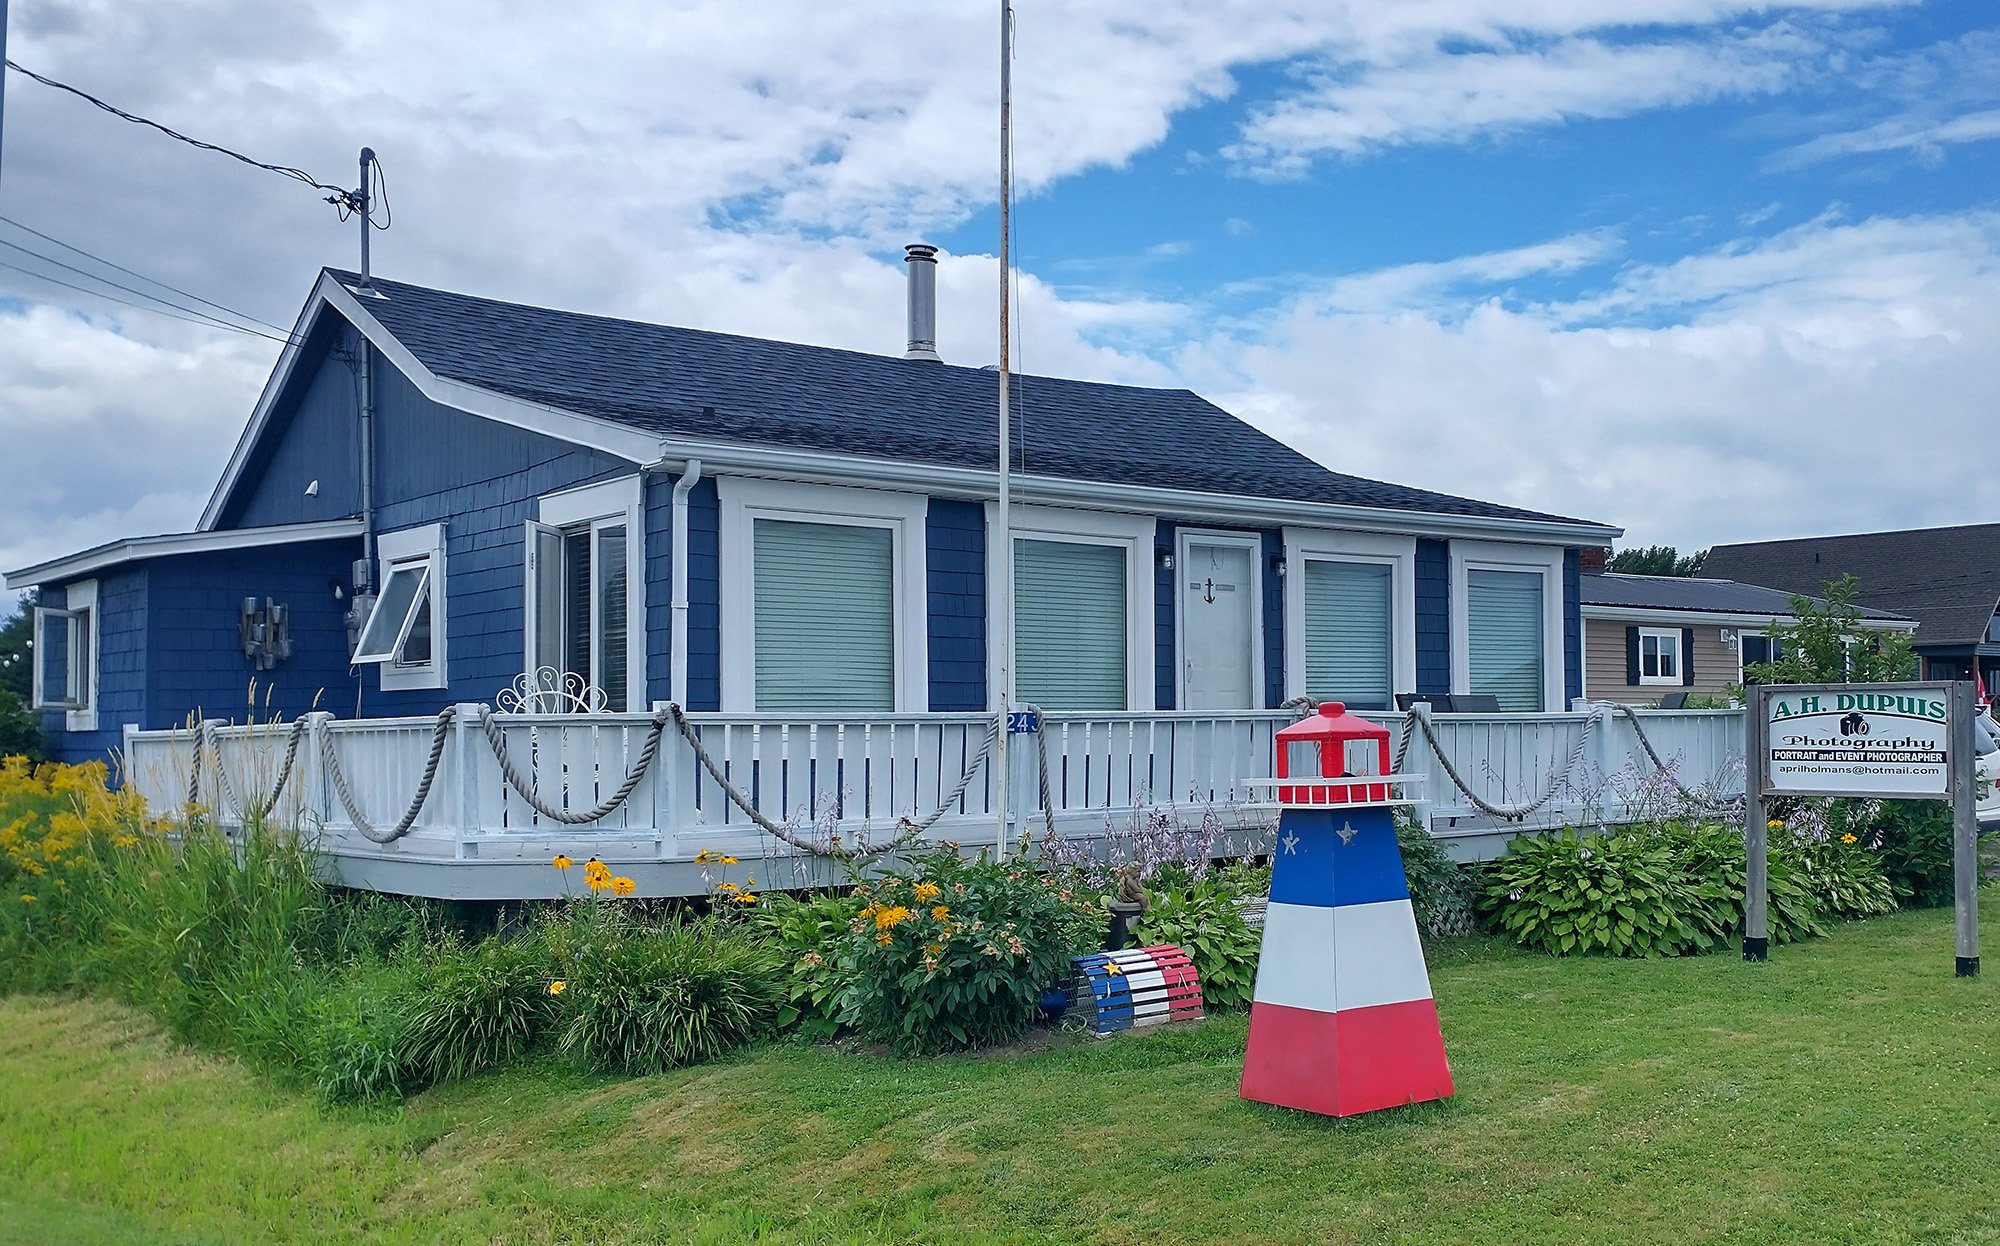 Lot of pretty colorful homes with the nautical themes and those lighthouse lamps.